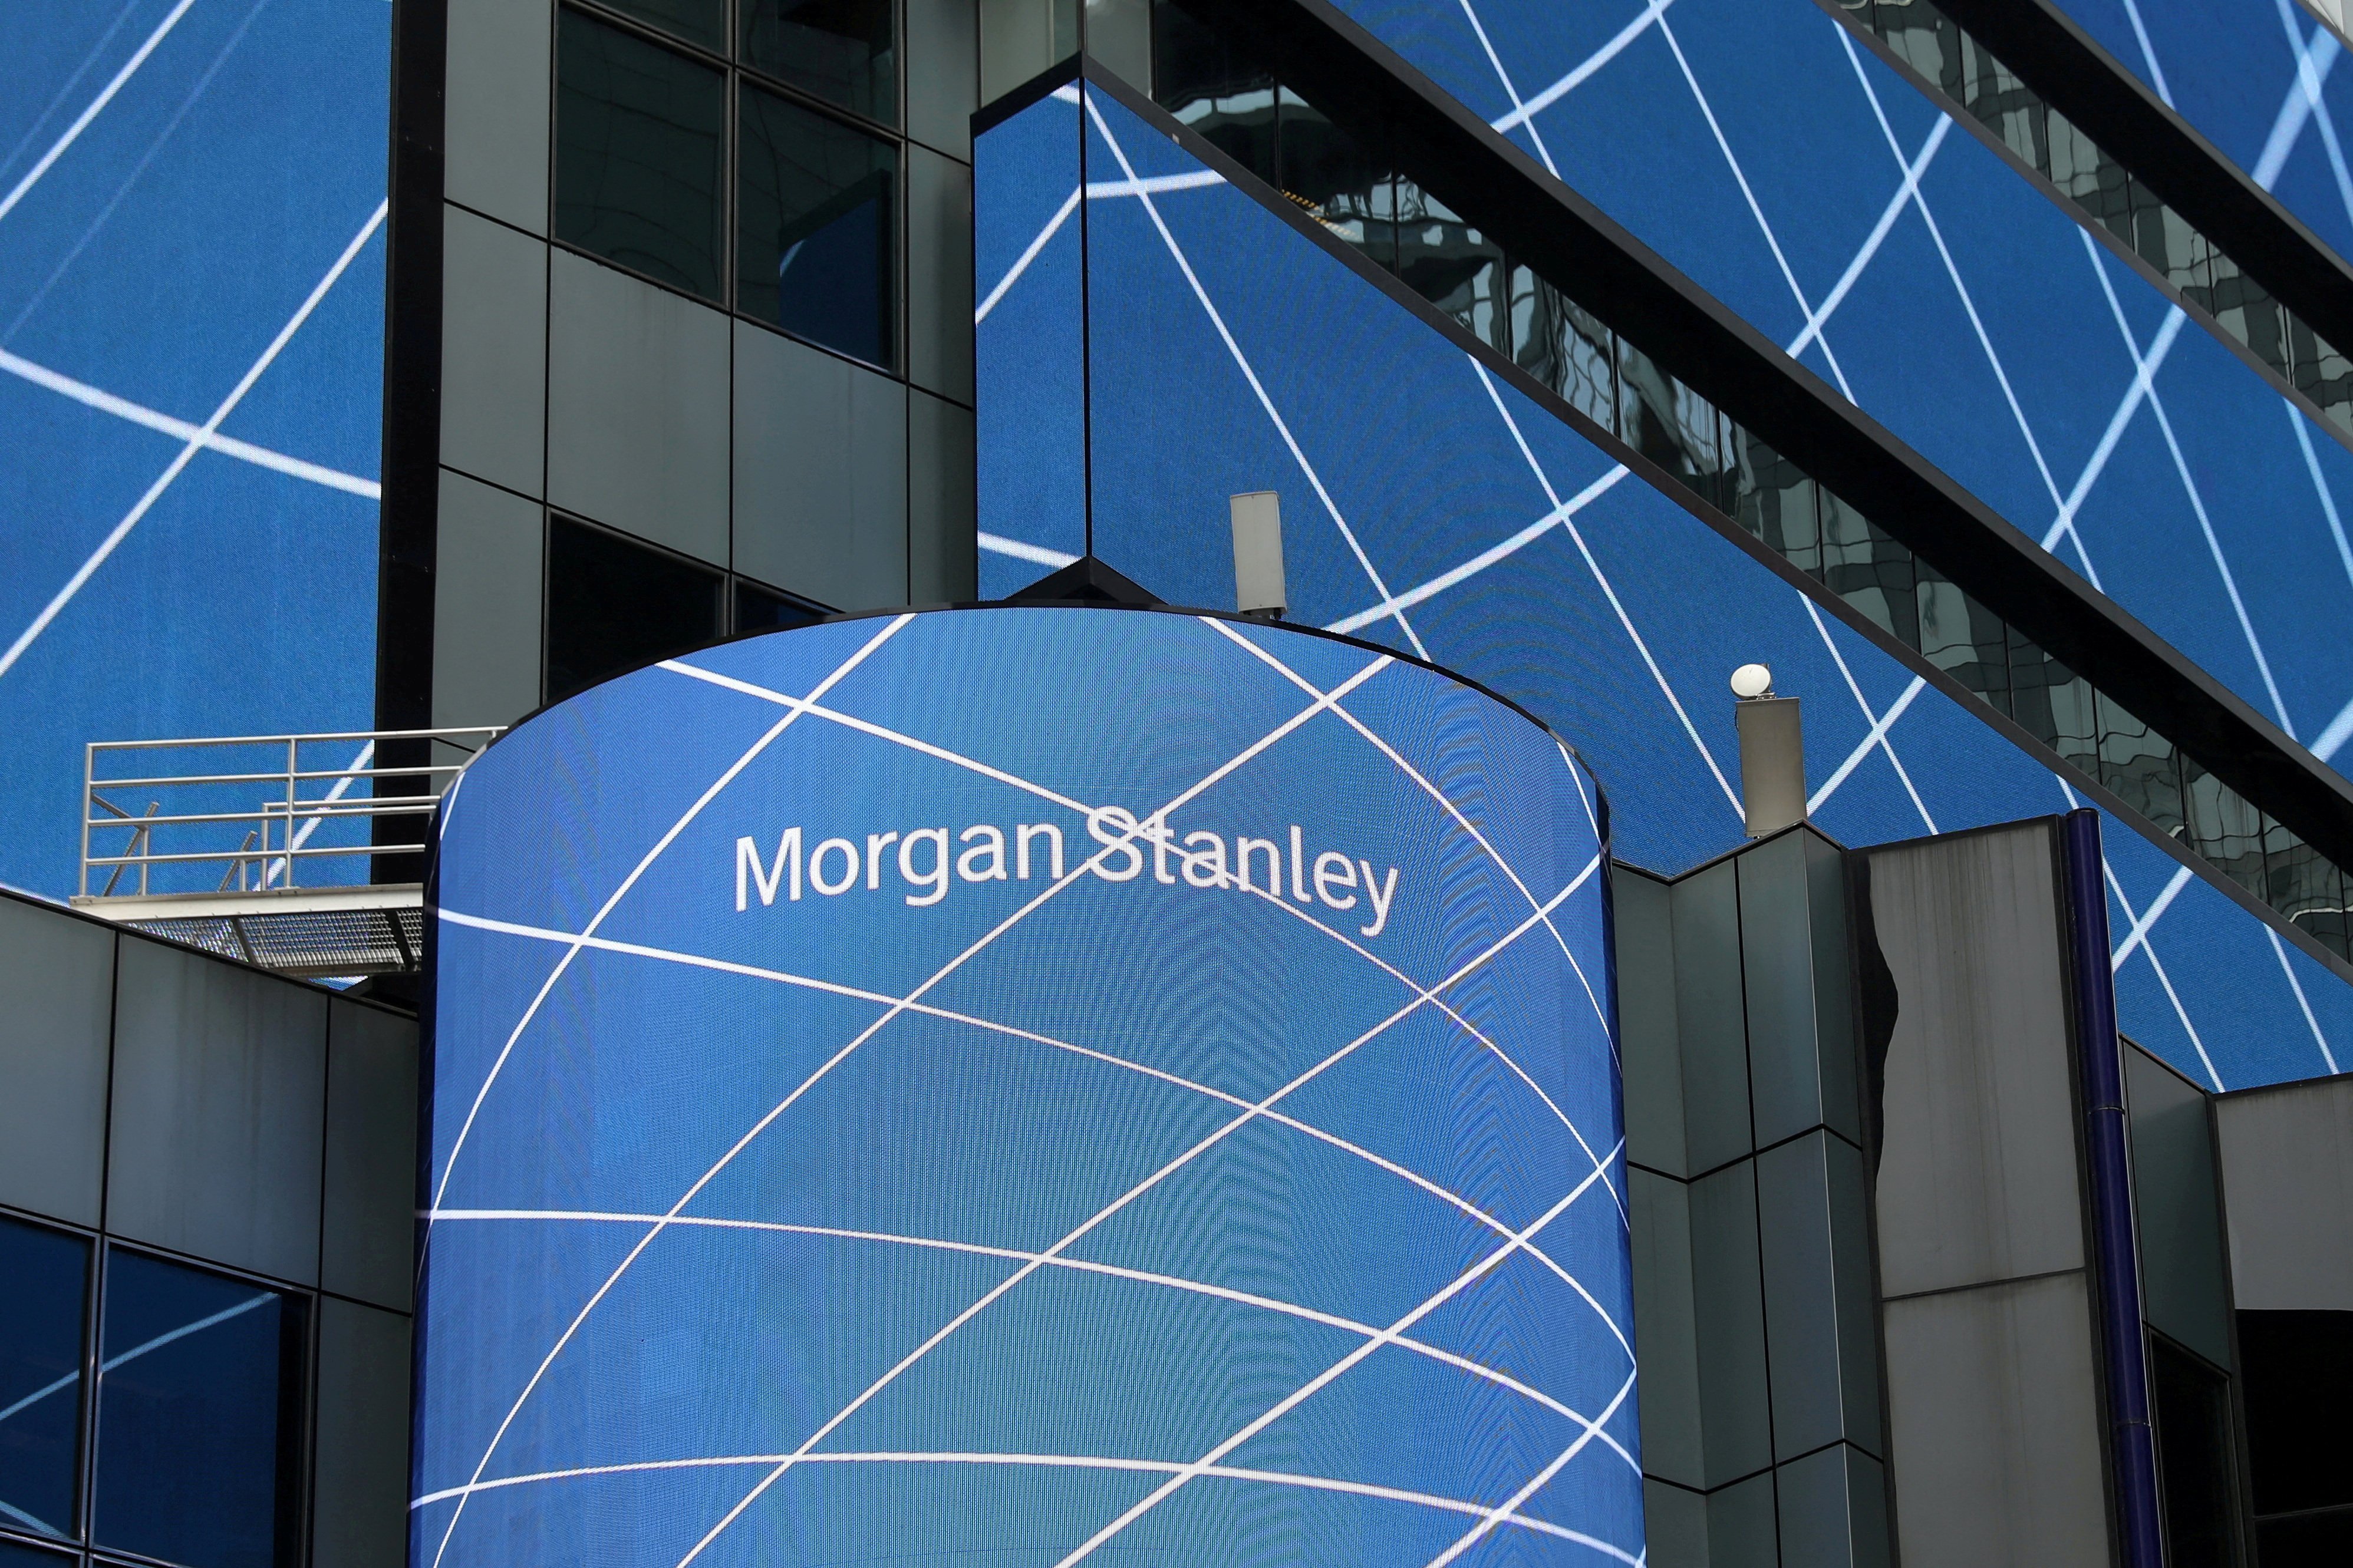 Morgan Stanley warned investors should approach Chinese stocks with caution at current levels. Photo: Reuters